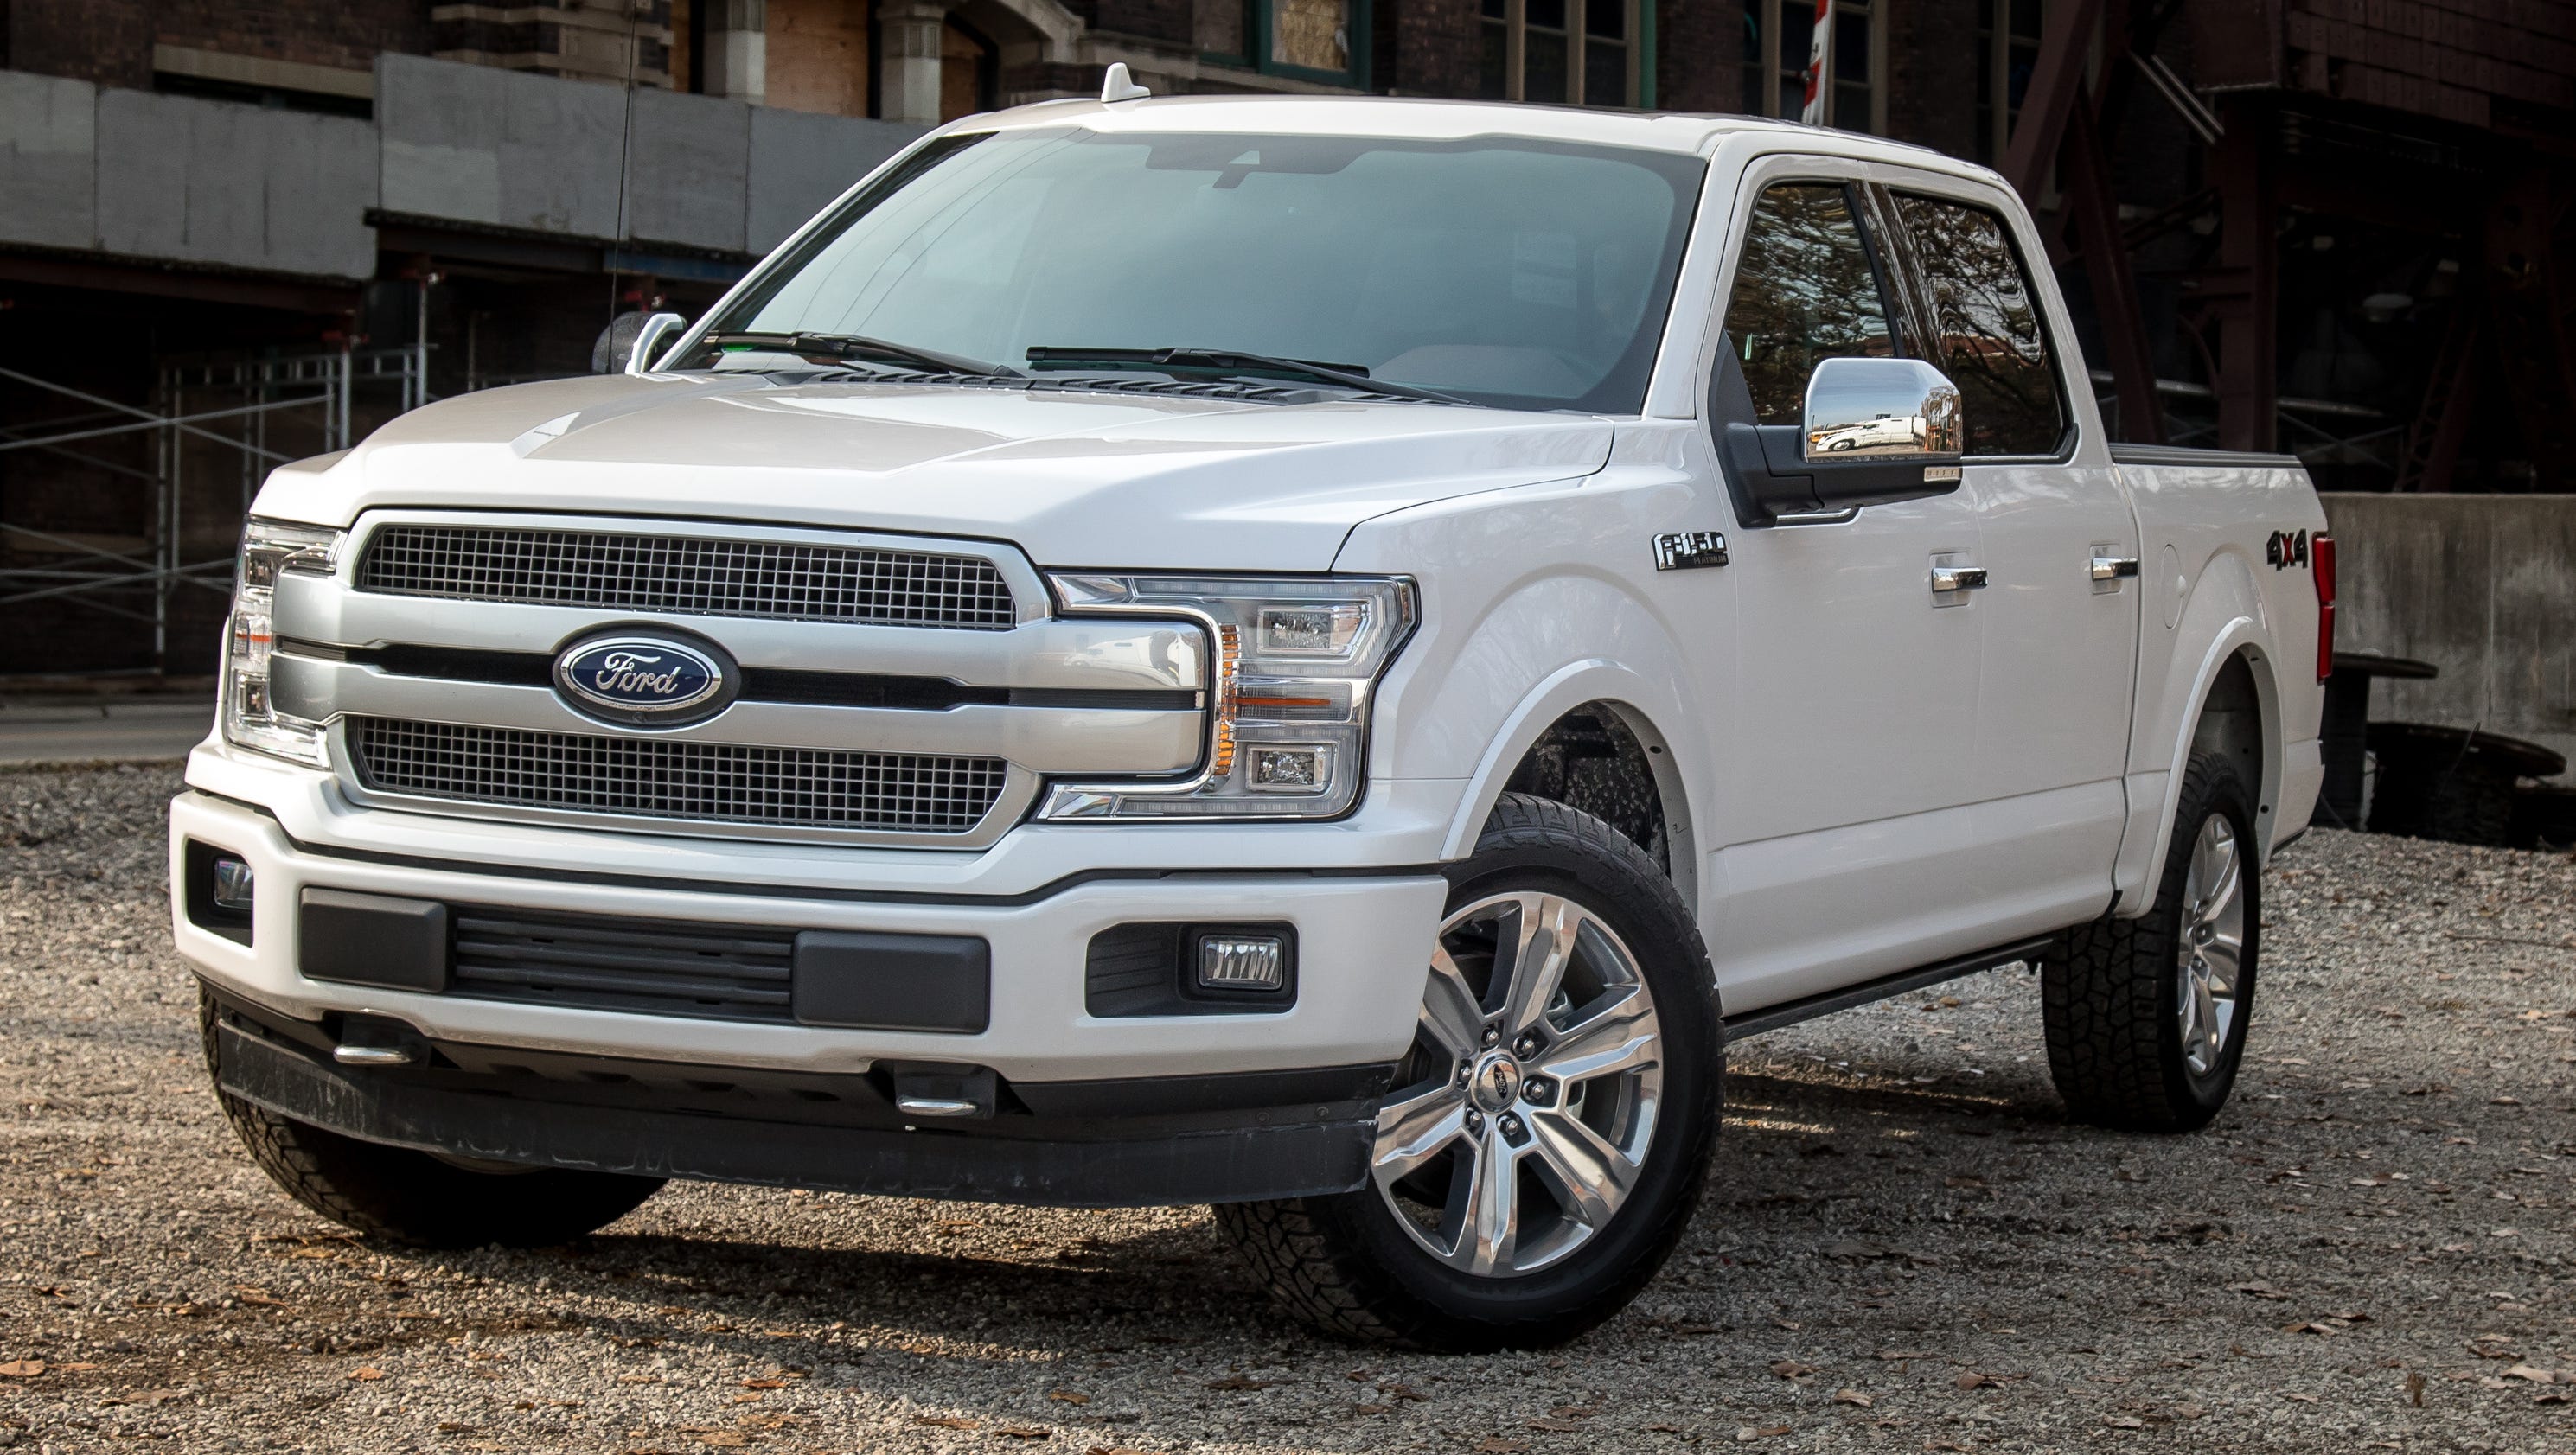 Review: Ford's plush F-150 Platinum gets a V-8 update